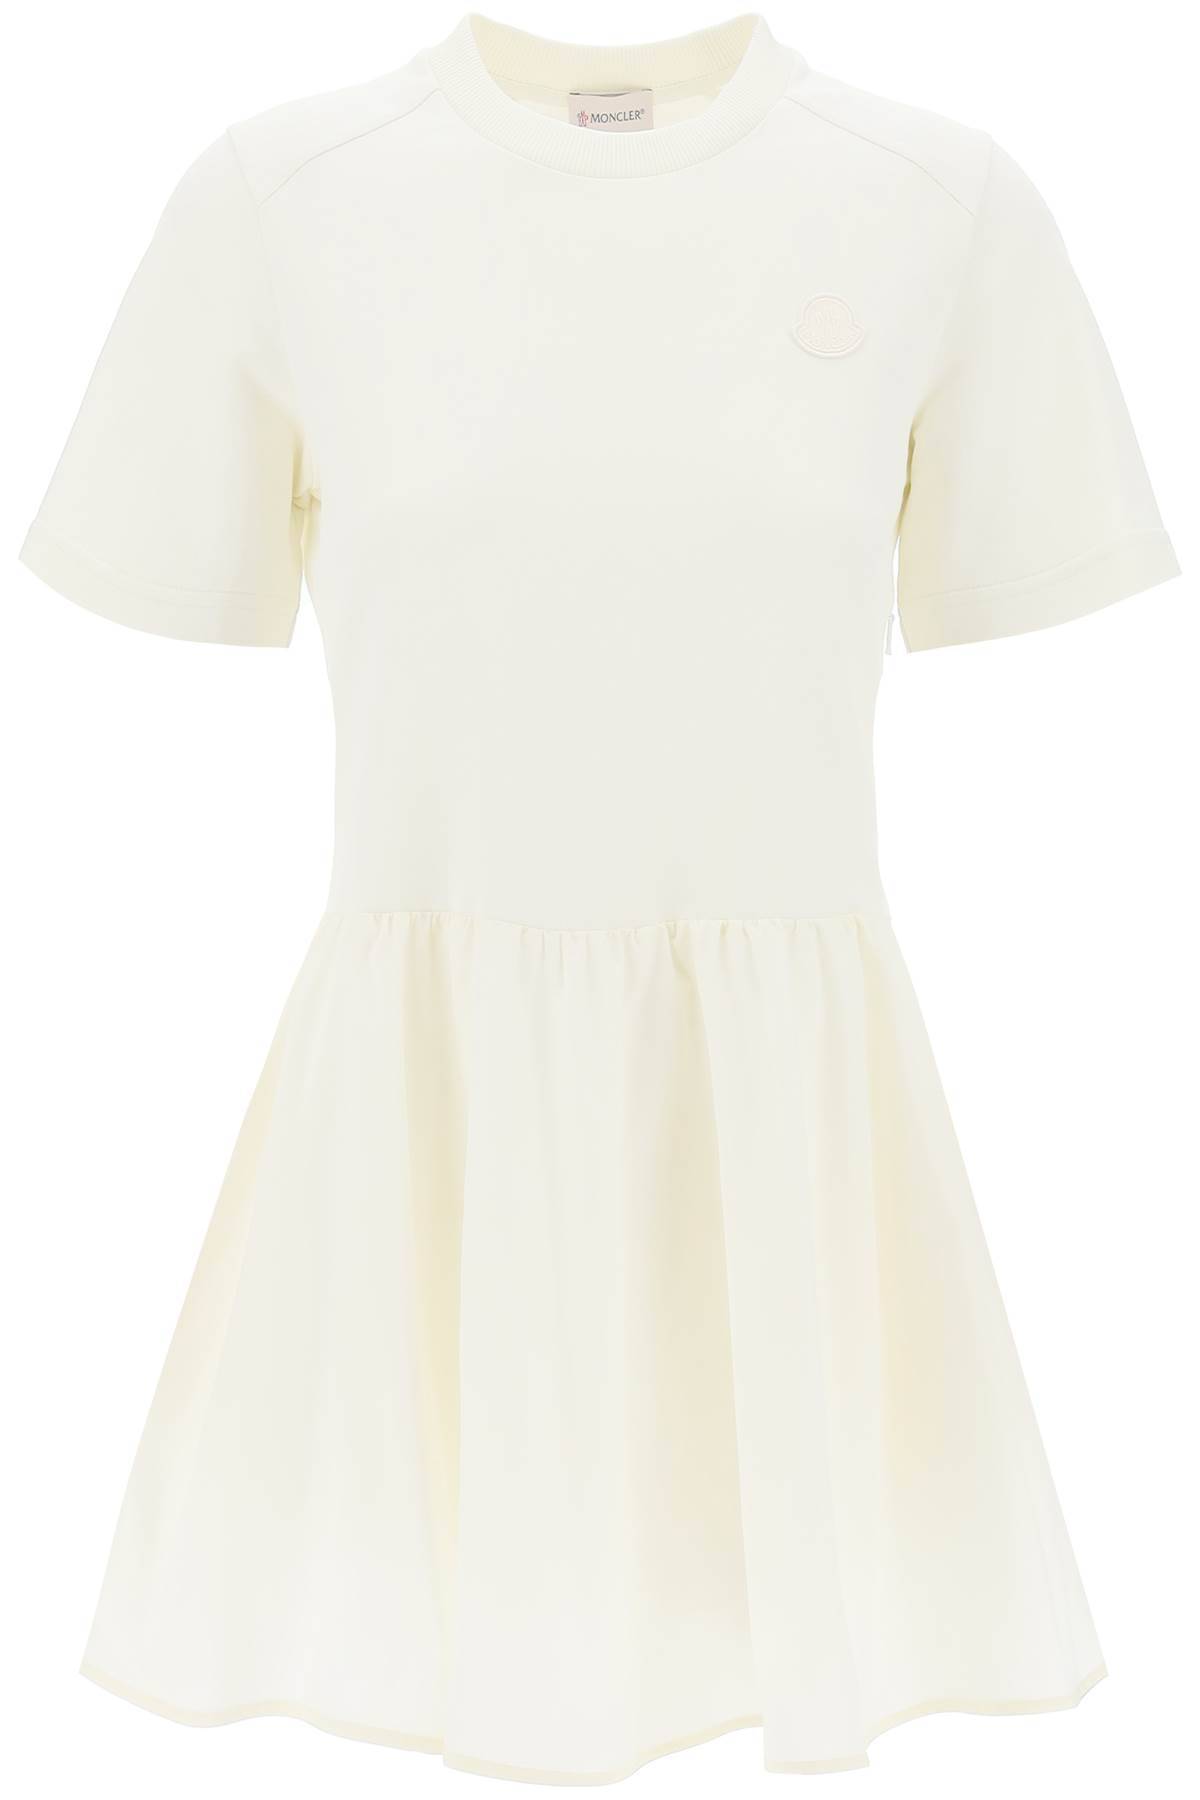 Moncler MONCLER two-tone mini dress with